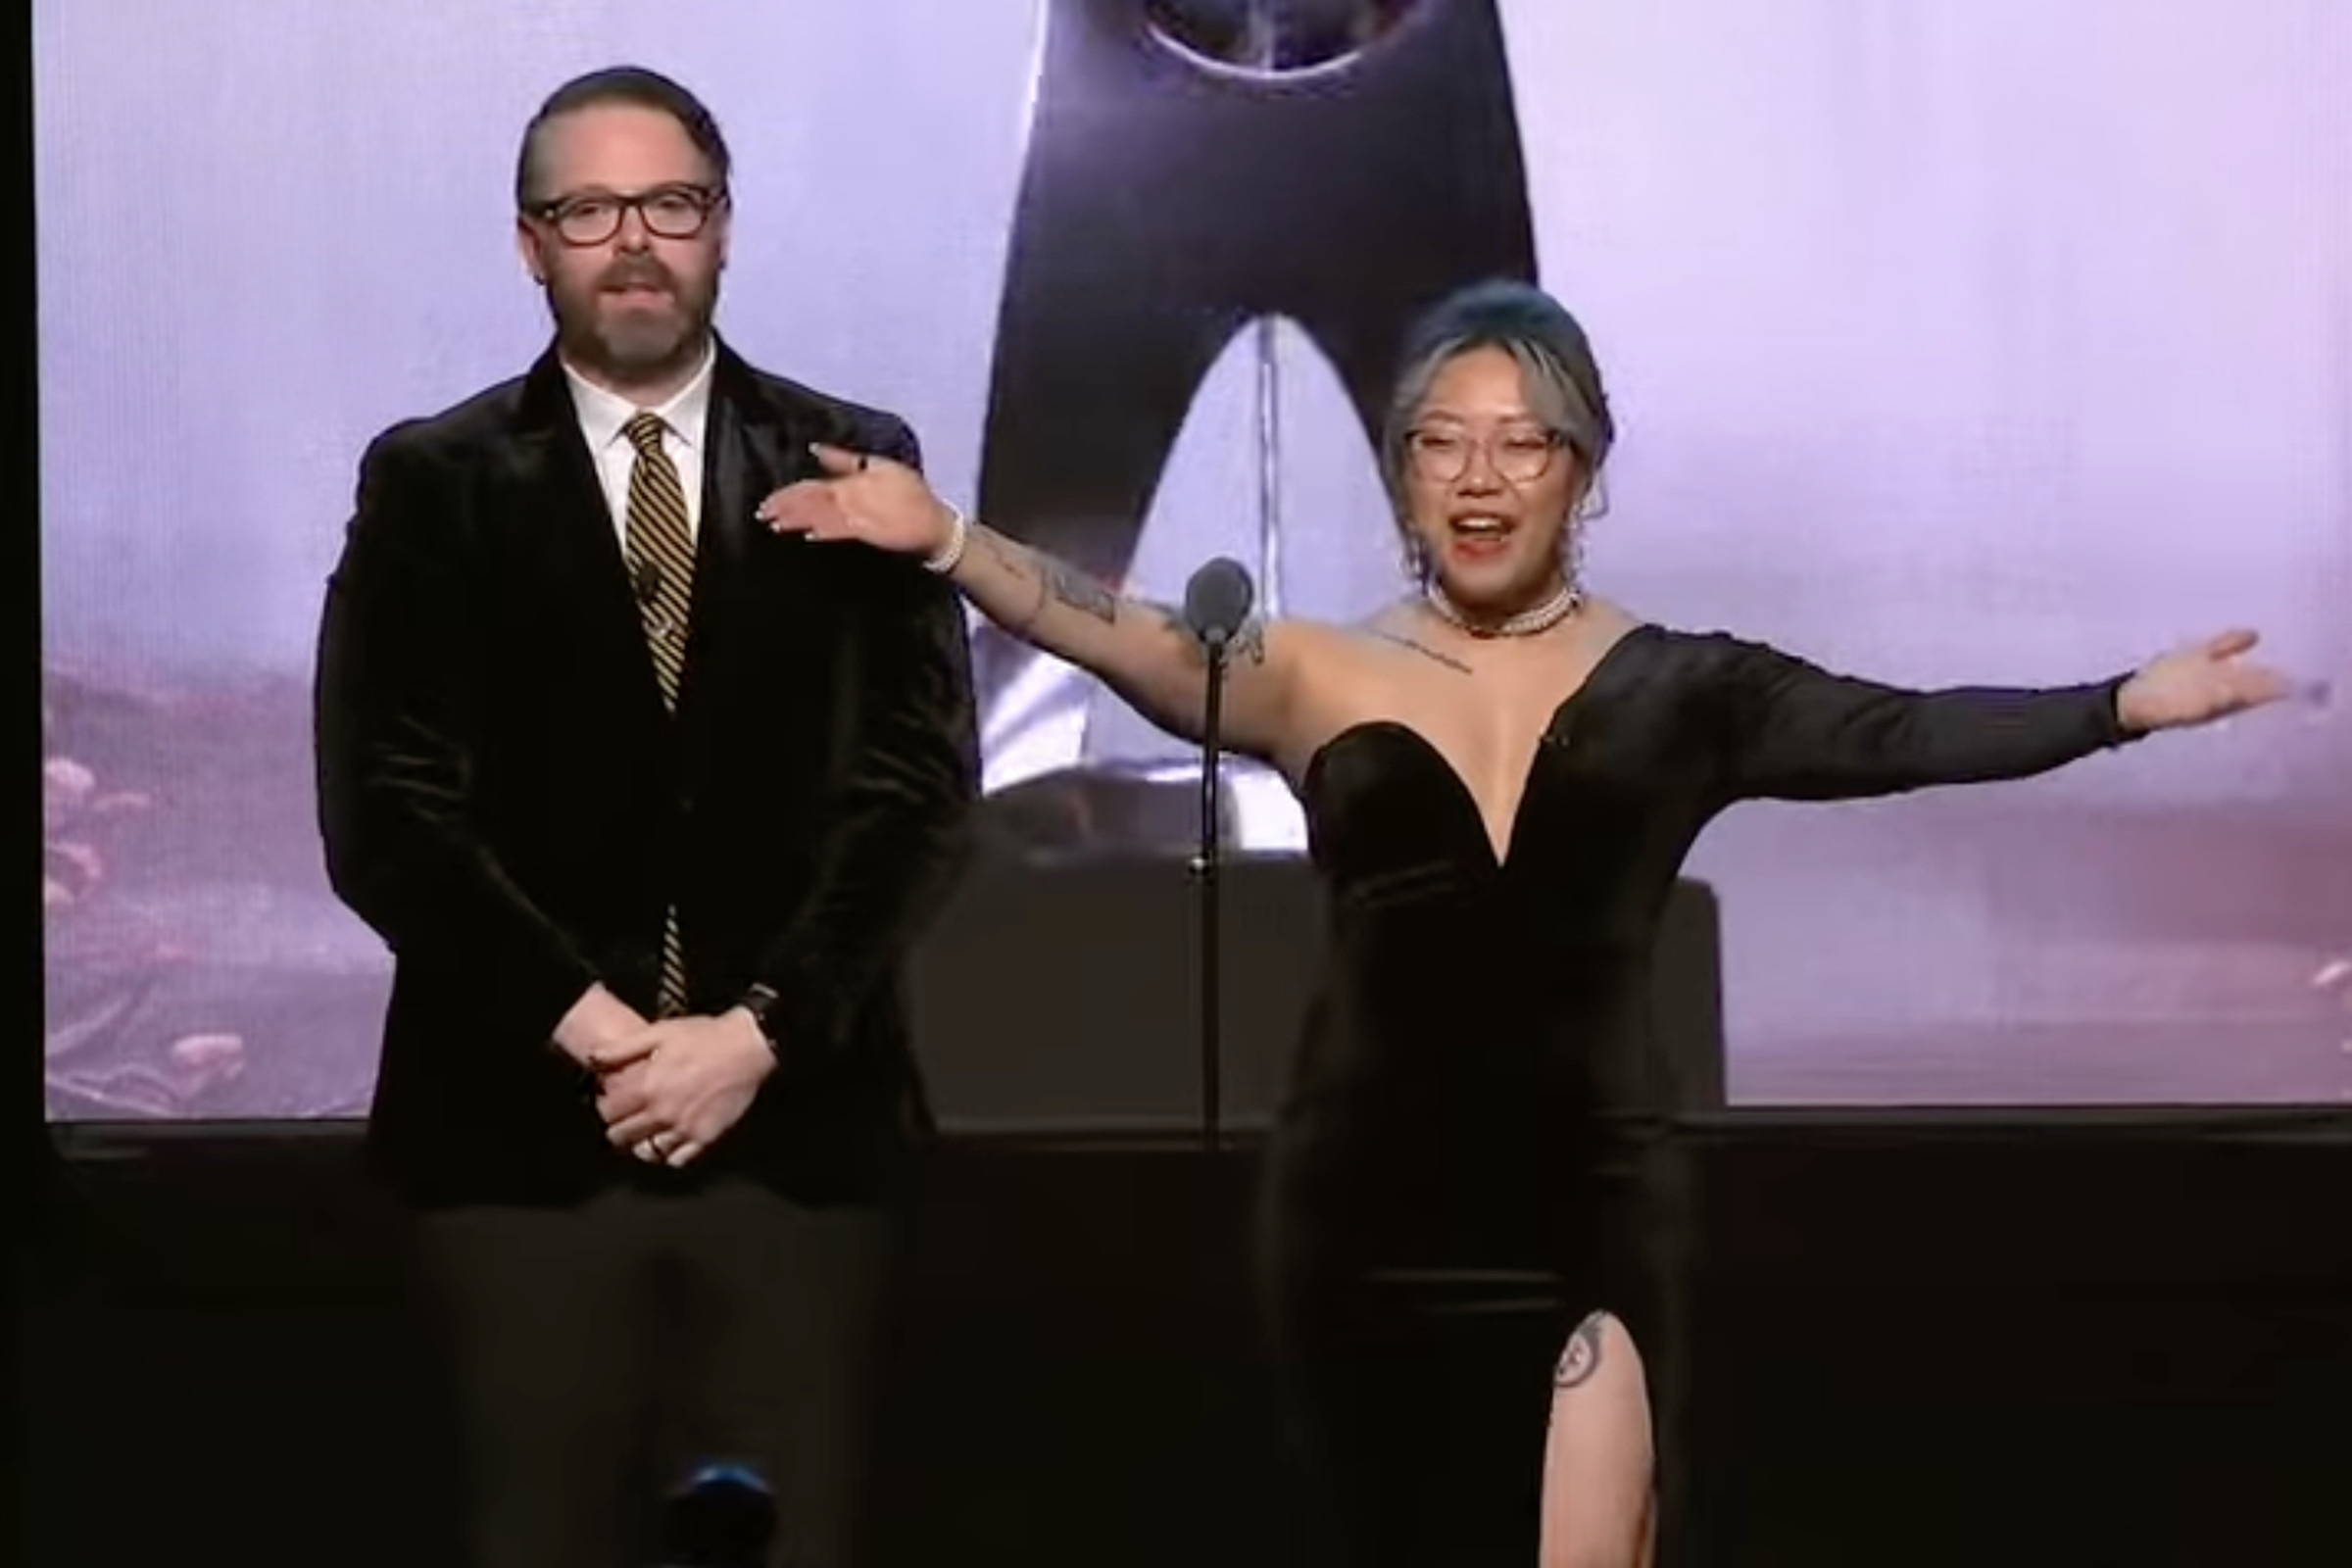 Screenshot from the 27th Annual D.I.C.E. Awards featuring the event’s two hosts Greg Miller (left) and Stella Chung (right).